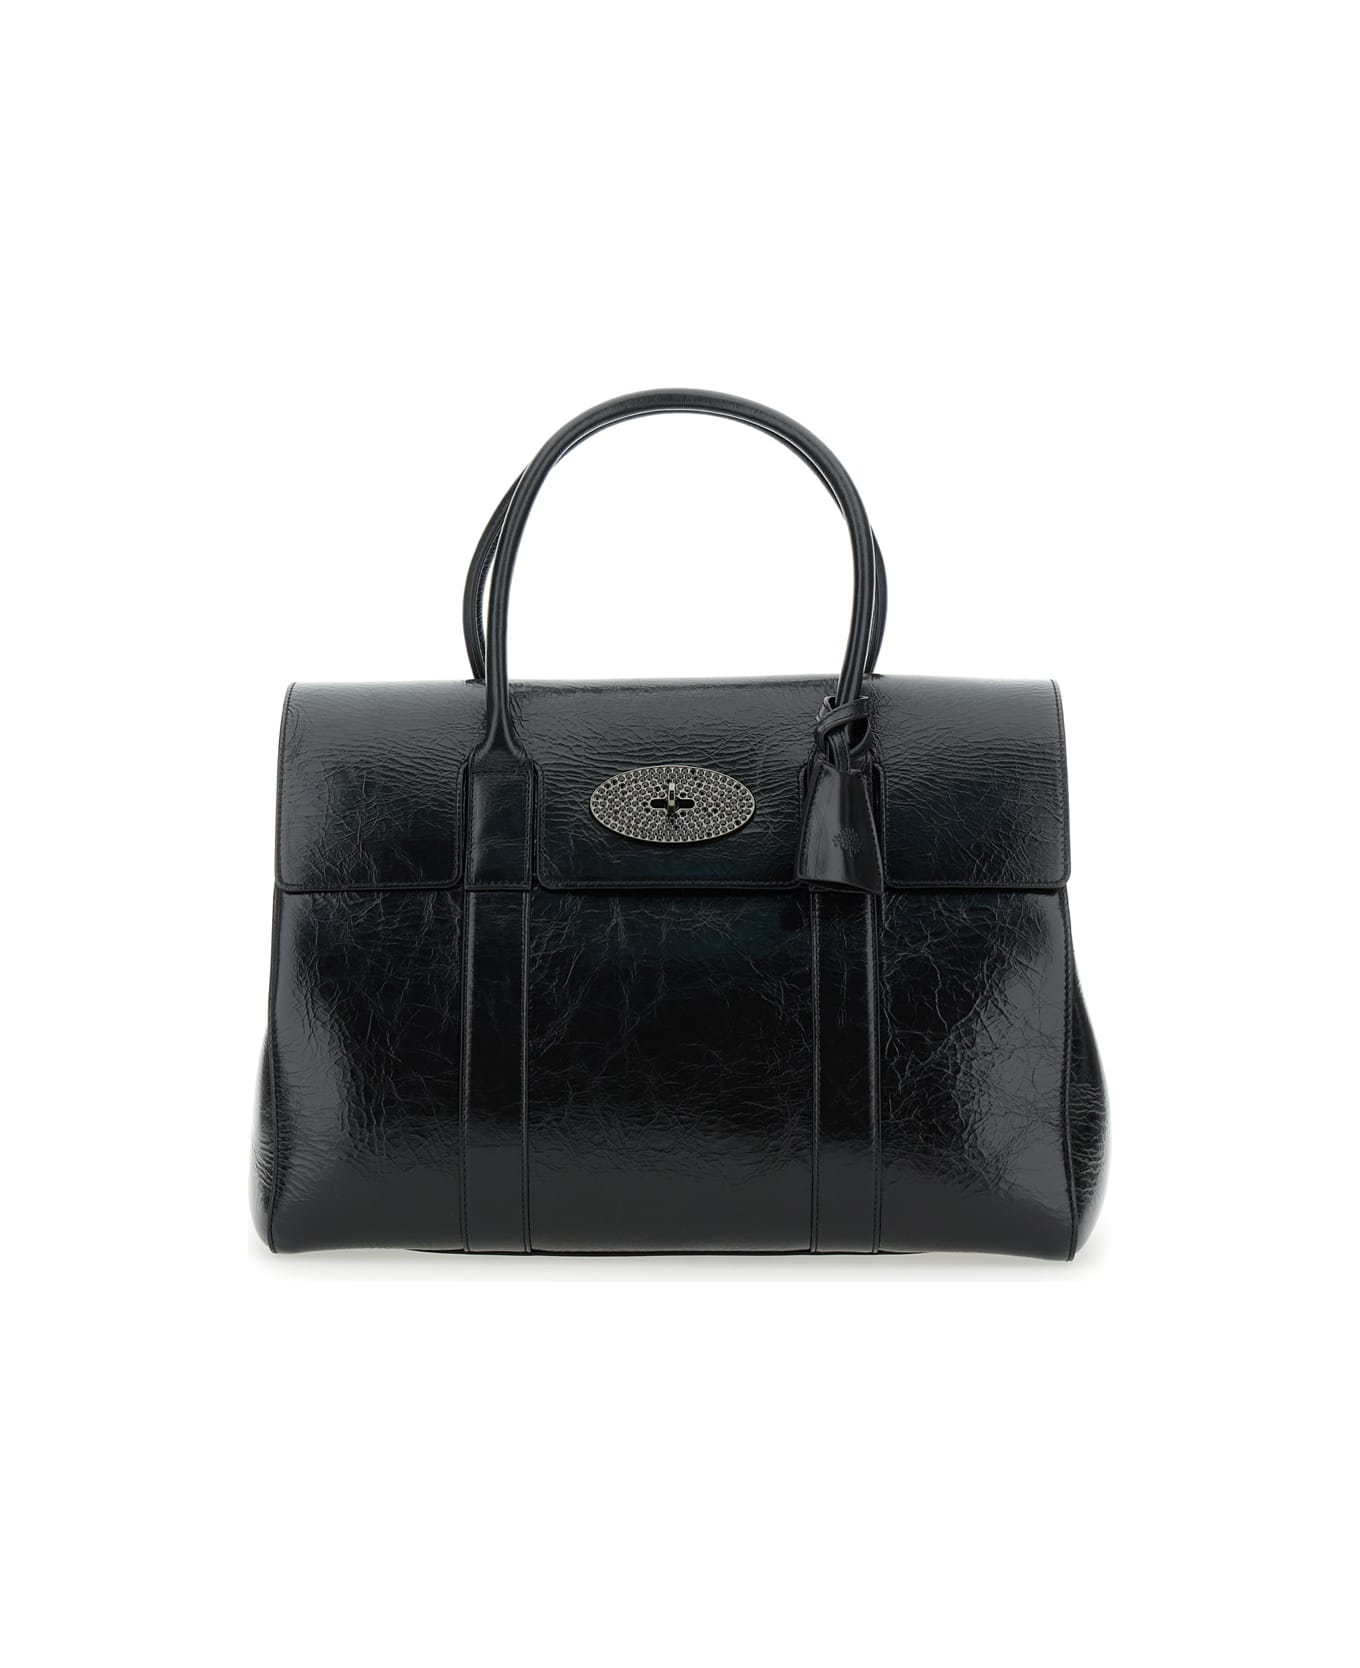 Mulberry 'bayswater' Black Handbag With Postman's Lock Closure In Leather Woman - Black